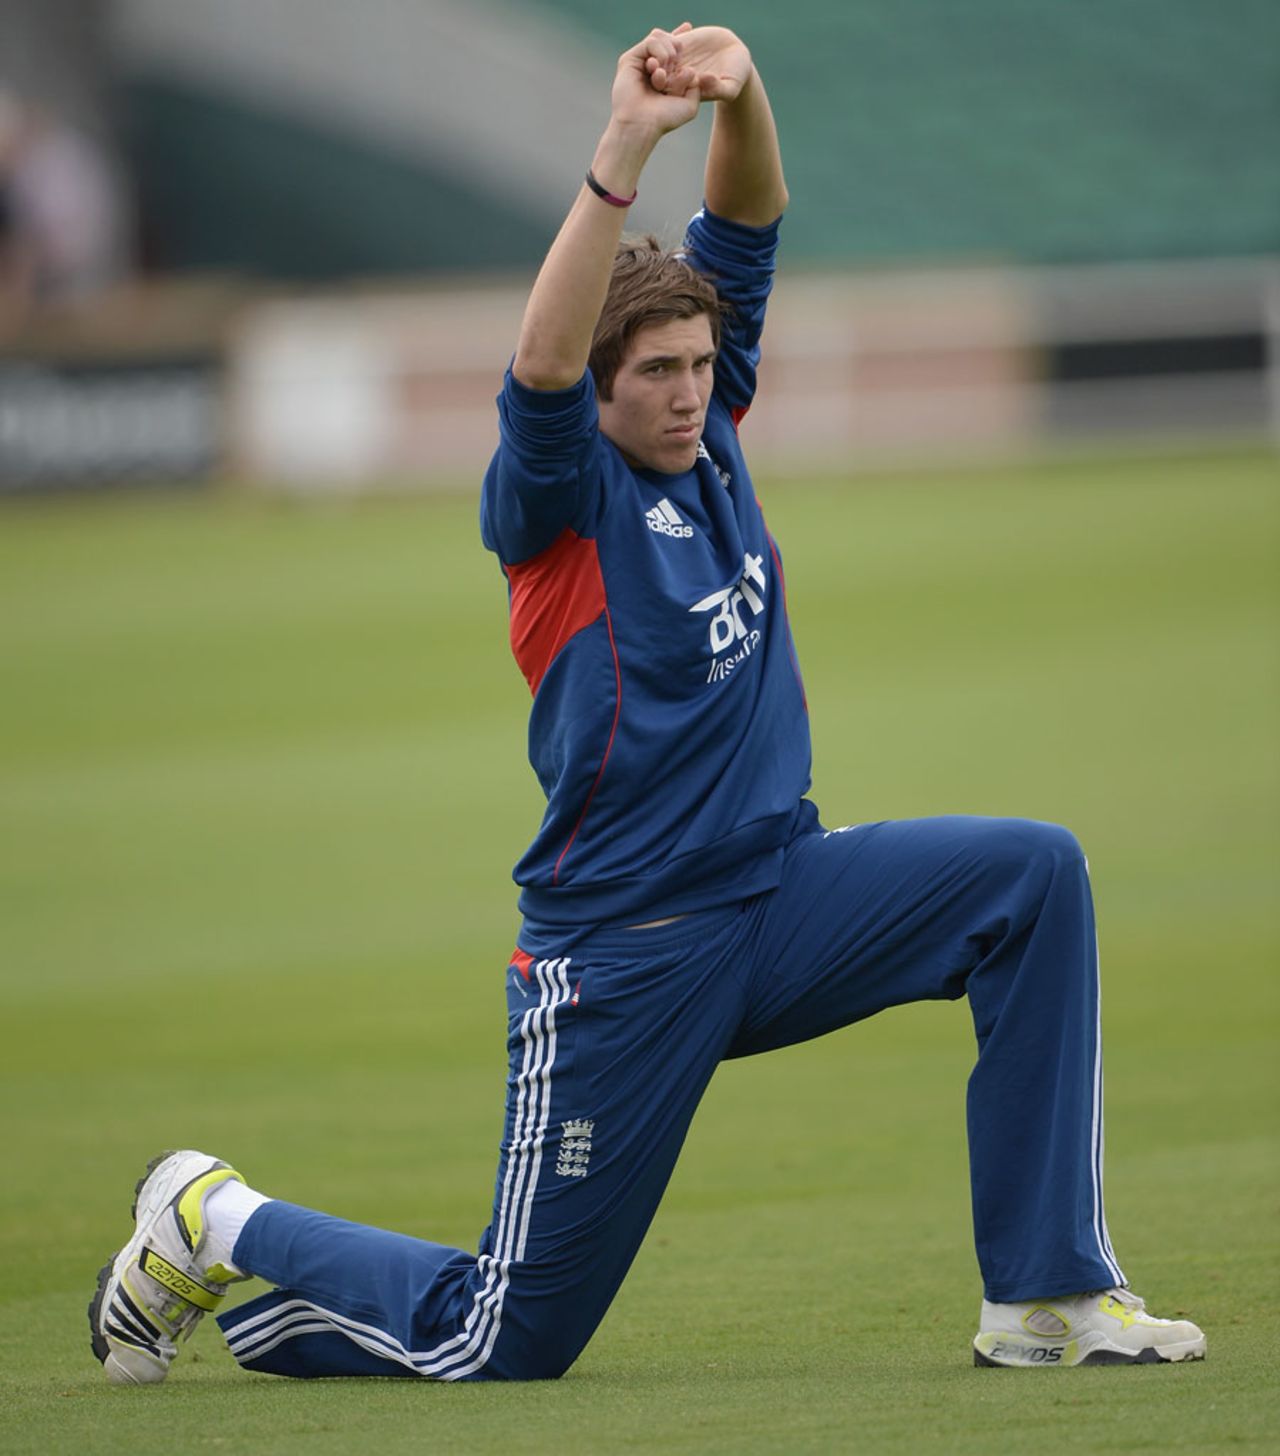 Jamie Overton stretches during a practice session, Headingley, September 5, 2013